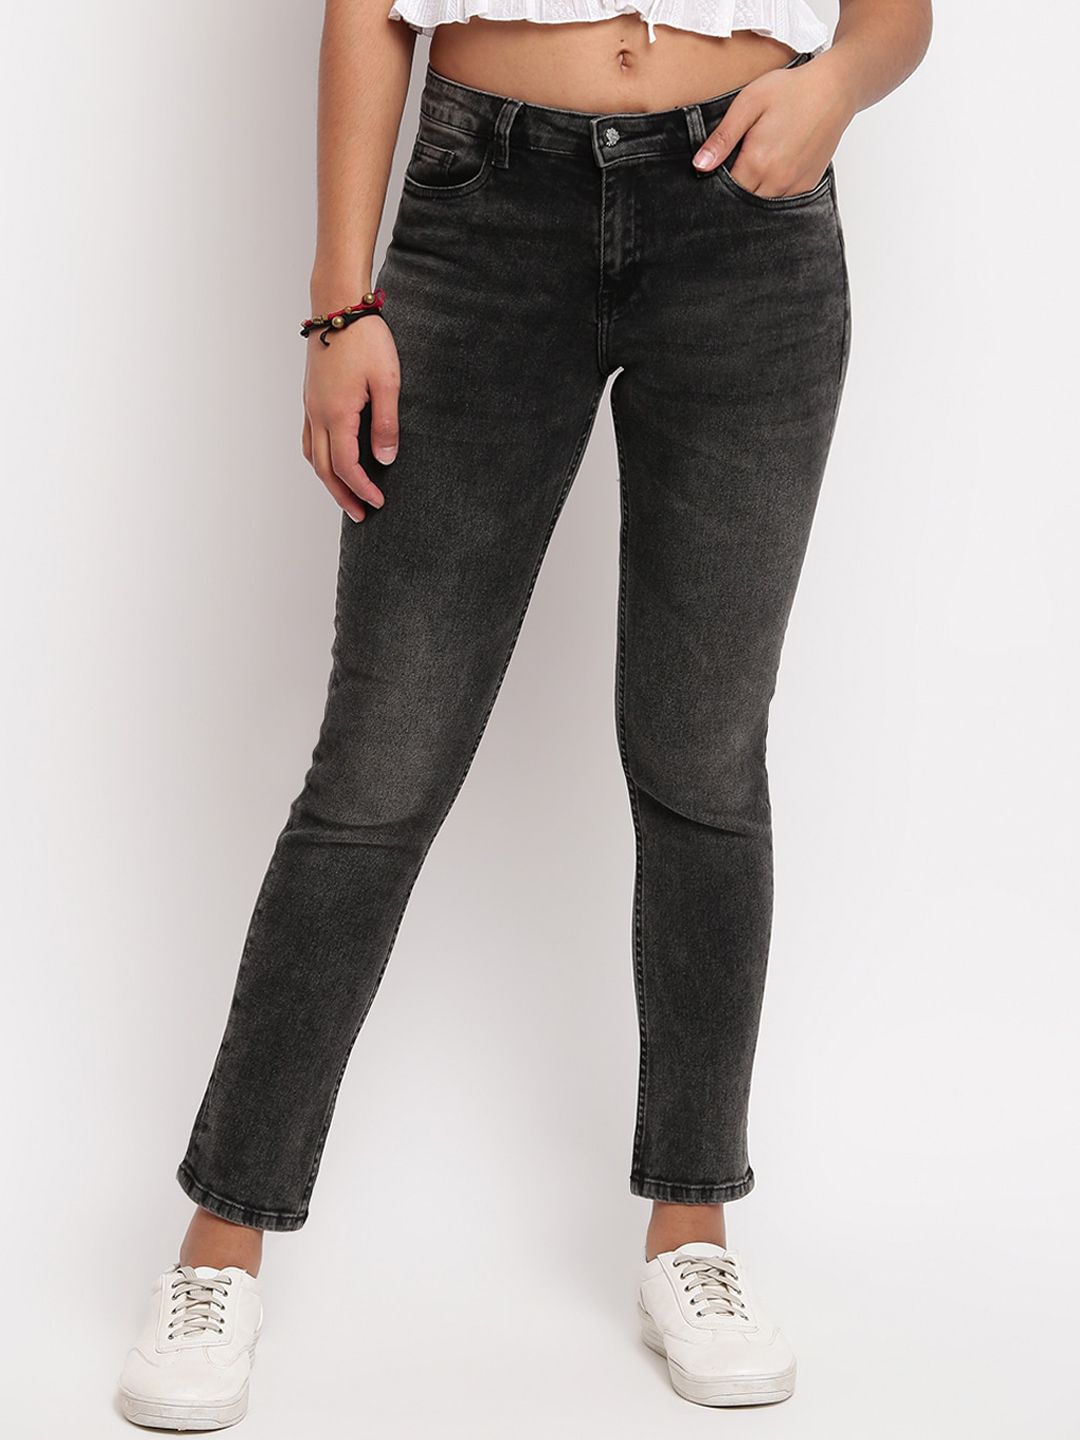 TALES & STORIES Women Black Slim Fit Heavy Faded Jeans Price in India